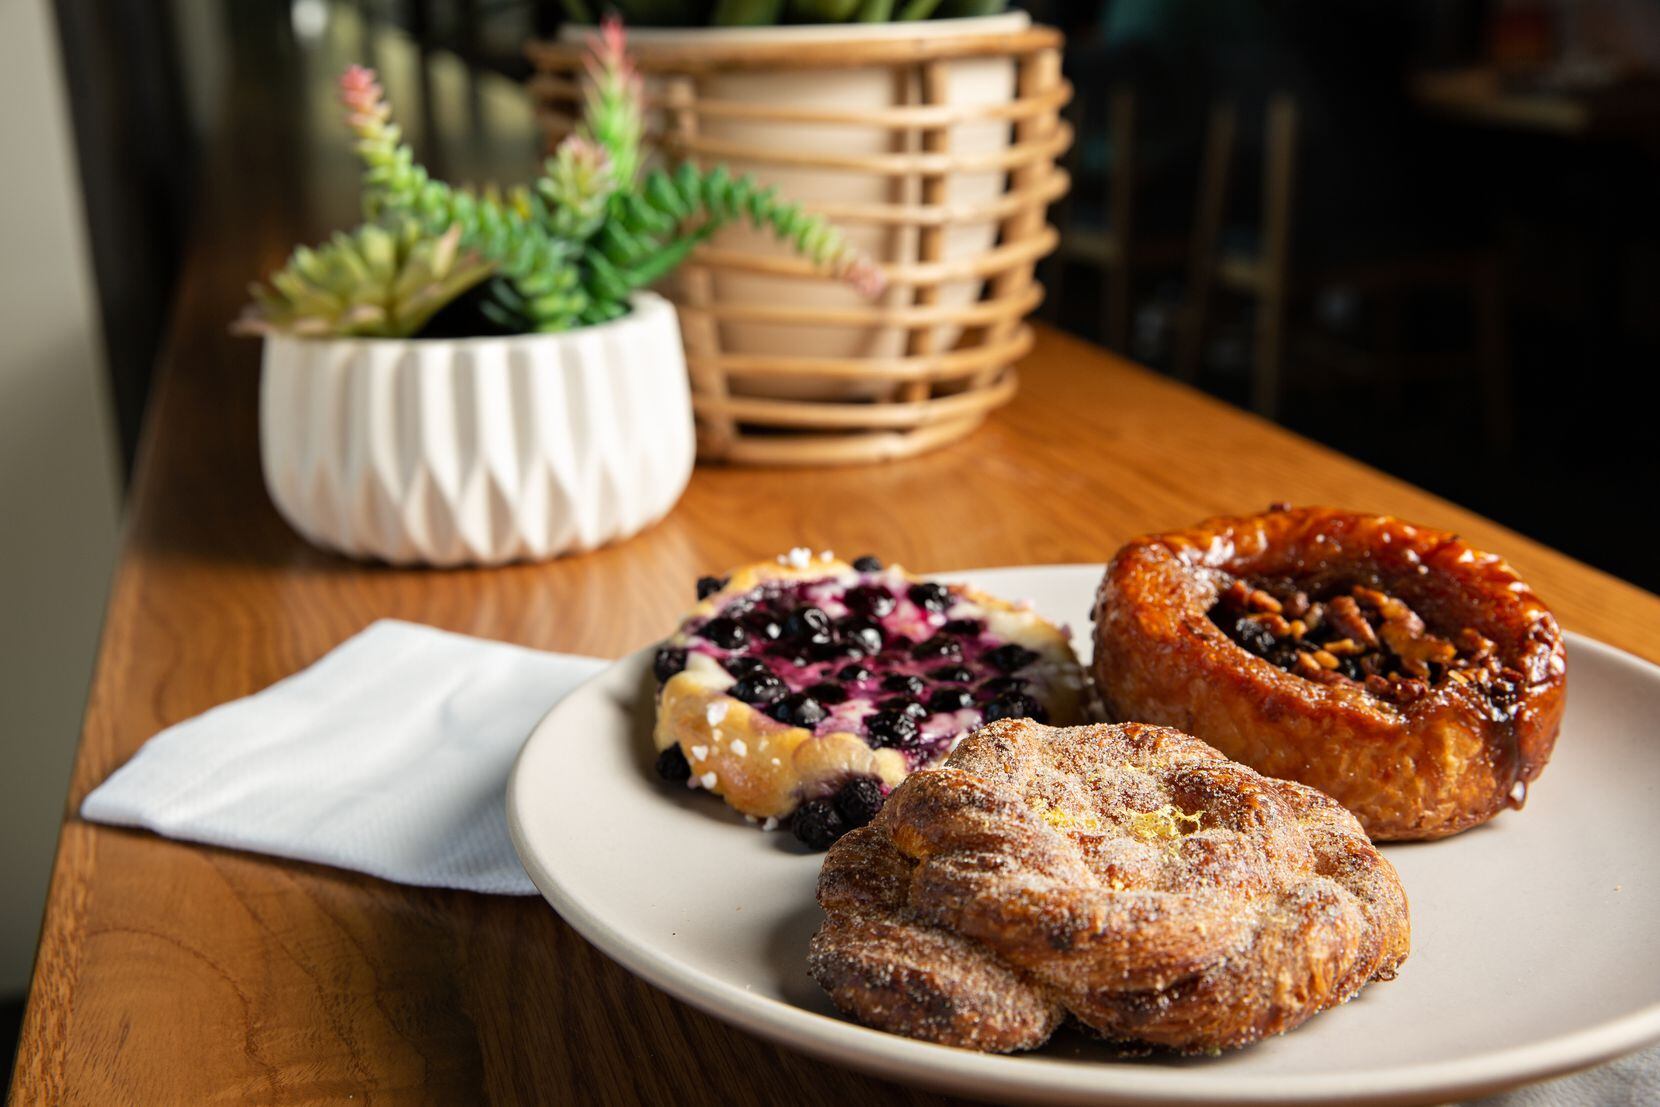 A variety of pastries baked by the Village baking team are sold at Doughregarde’s Bake Shop.